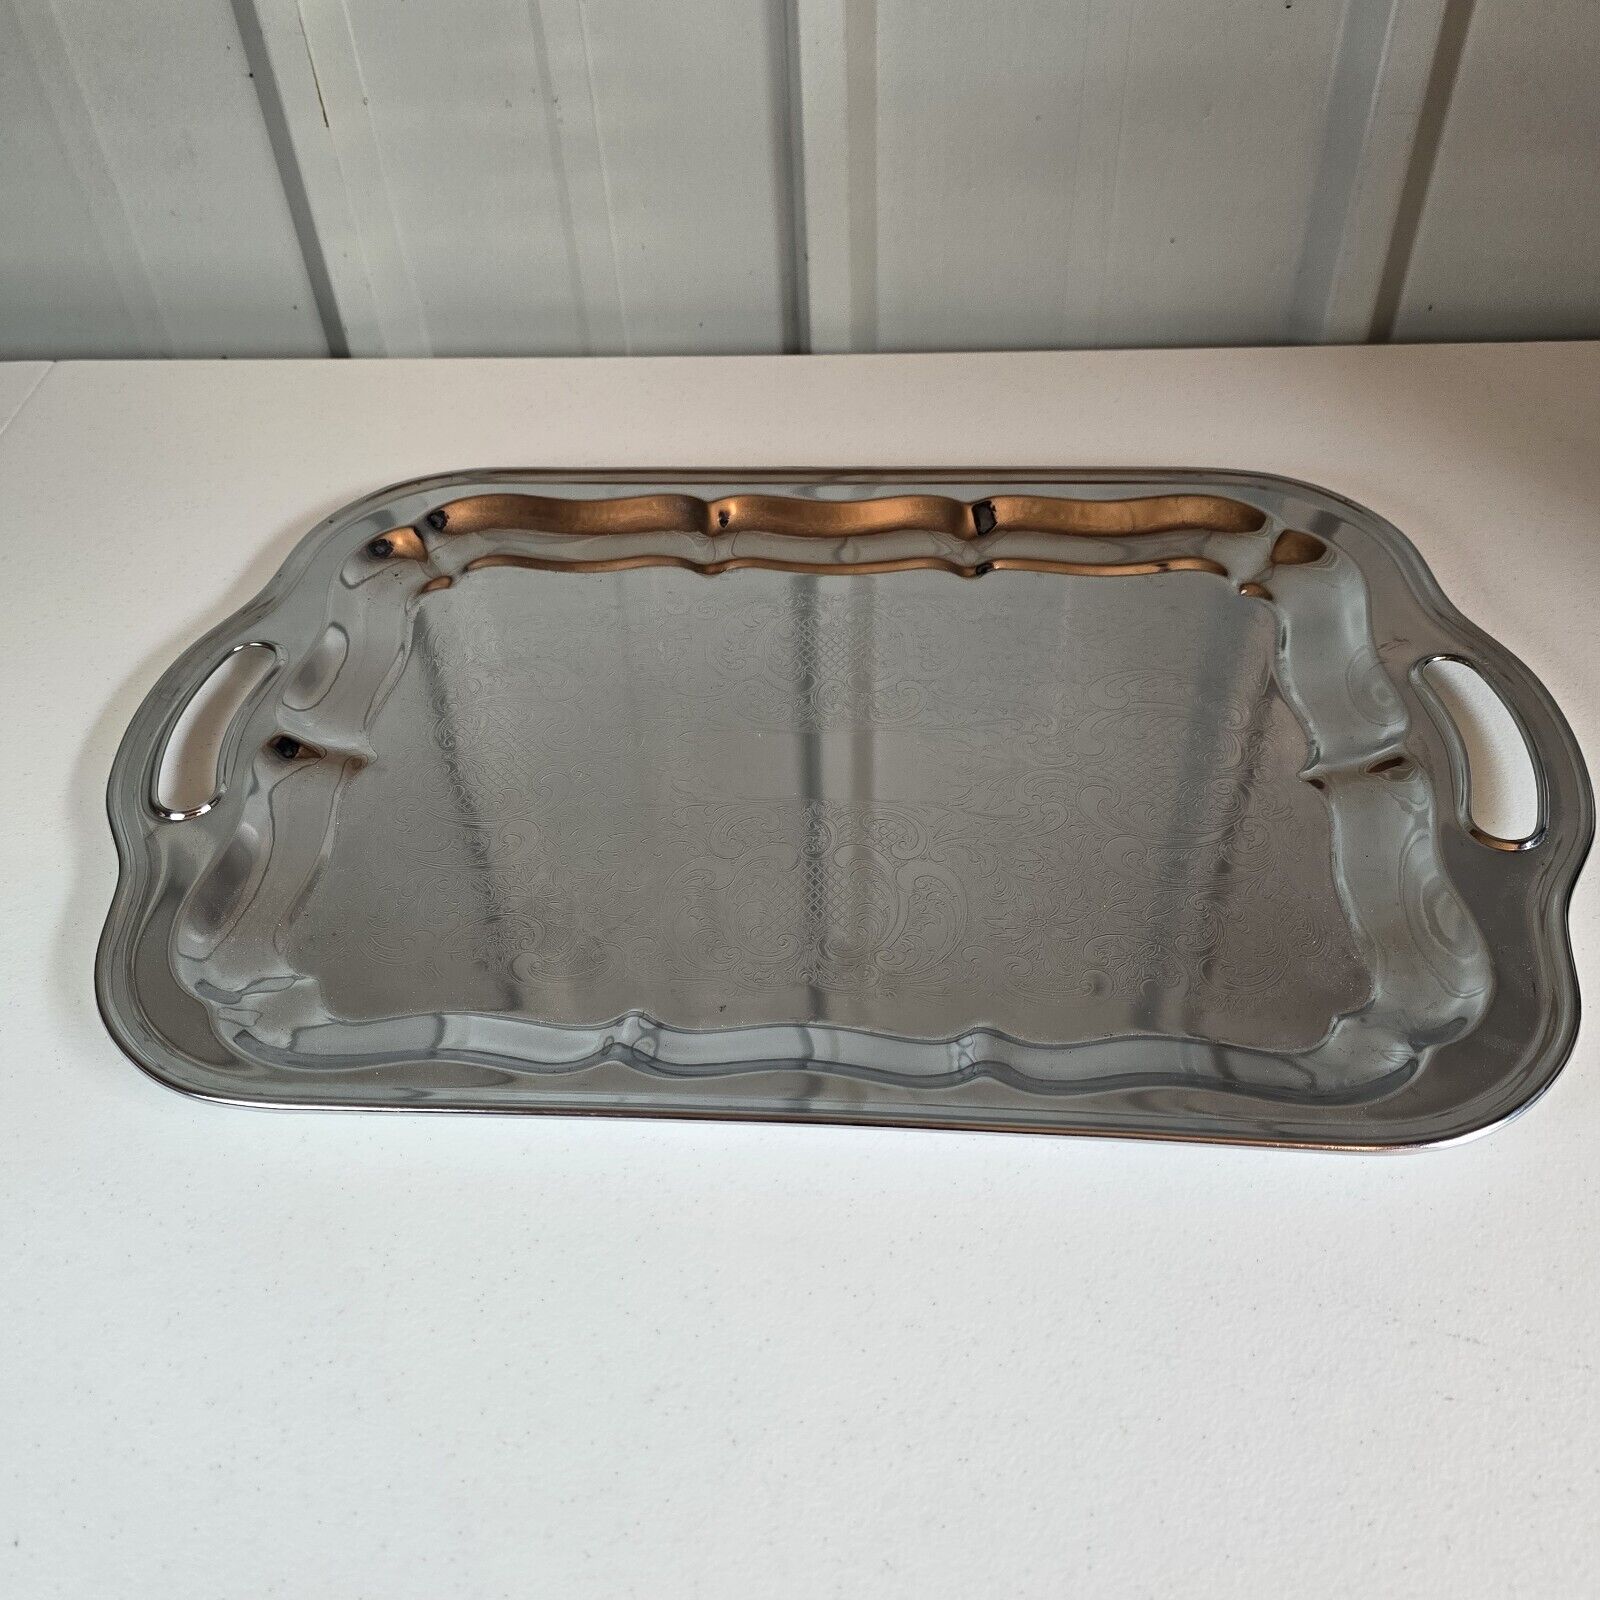 Vintage Irvinware Engraved Chrome Serving Tray Mid Century Art Deco Made in USA